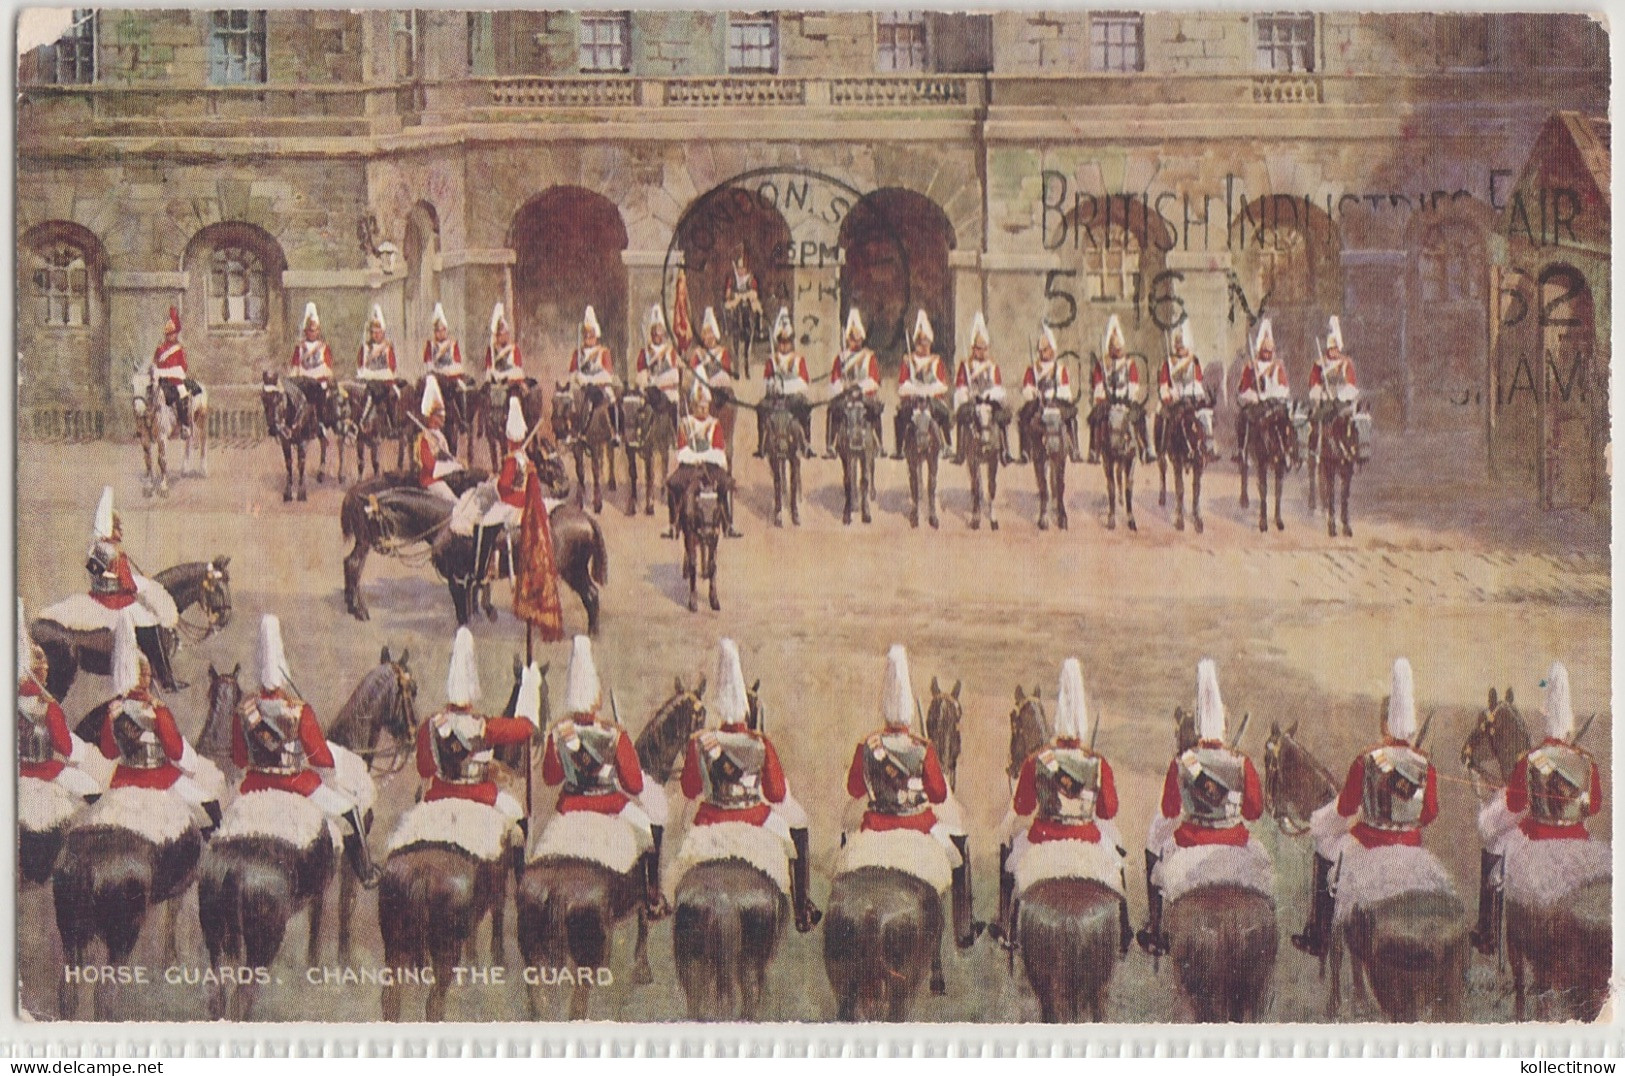 HORSE GUARDS - CHANGING THE GUARD - Whitehall